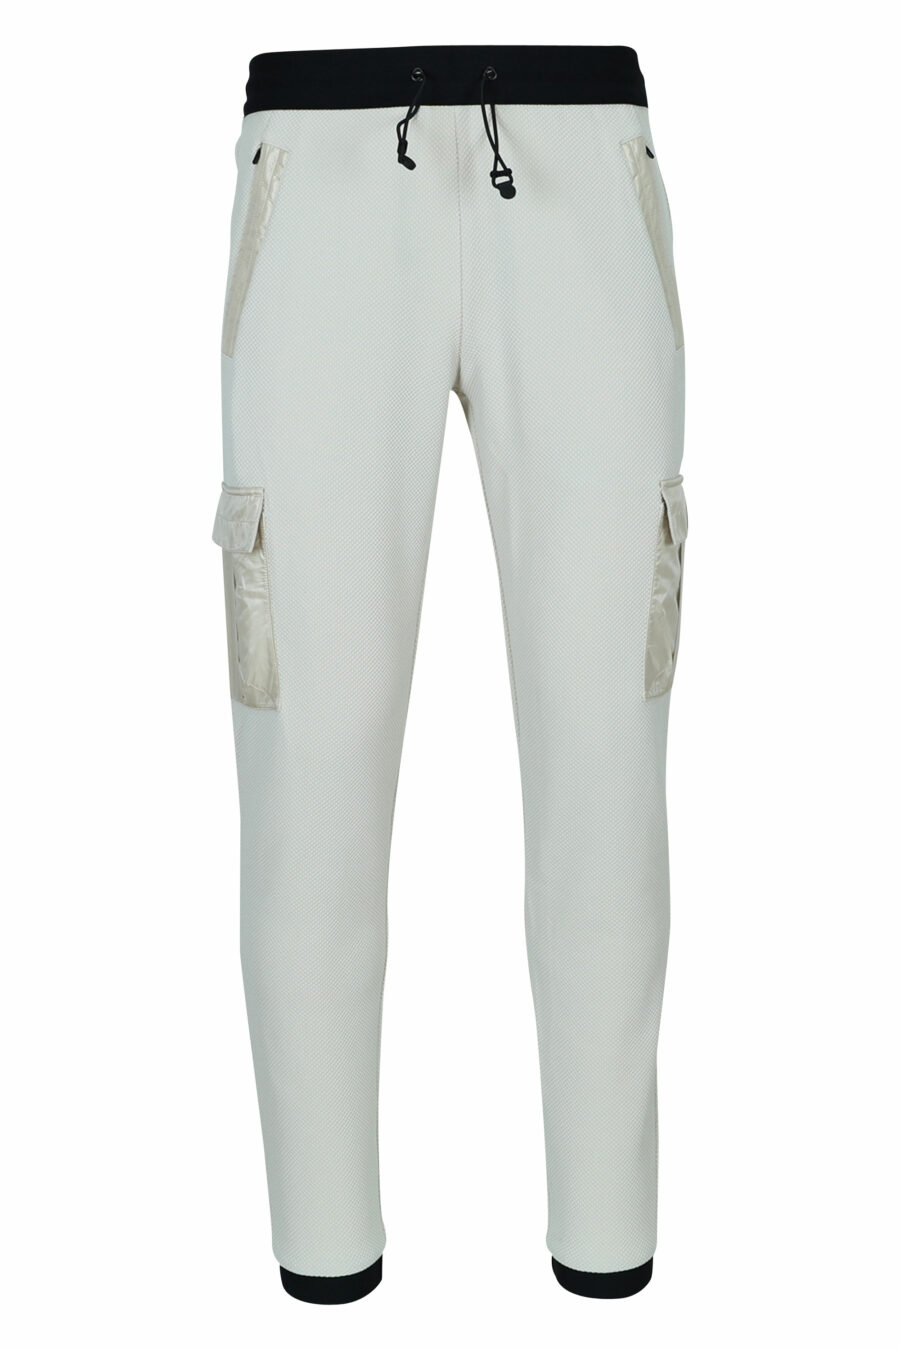 Tracksuit bottoms beige mix cargo style and mini-logo "lux identity" - 8057970665359